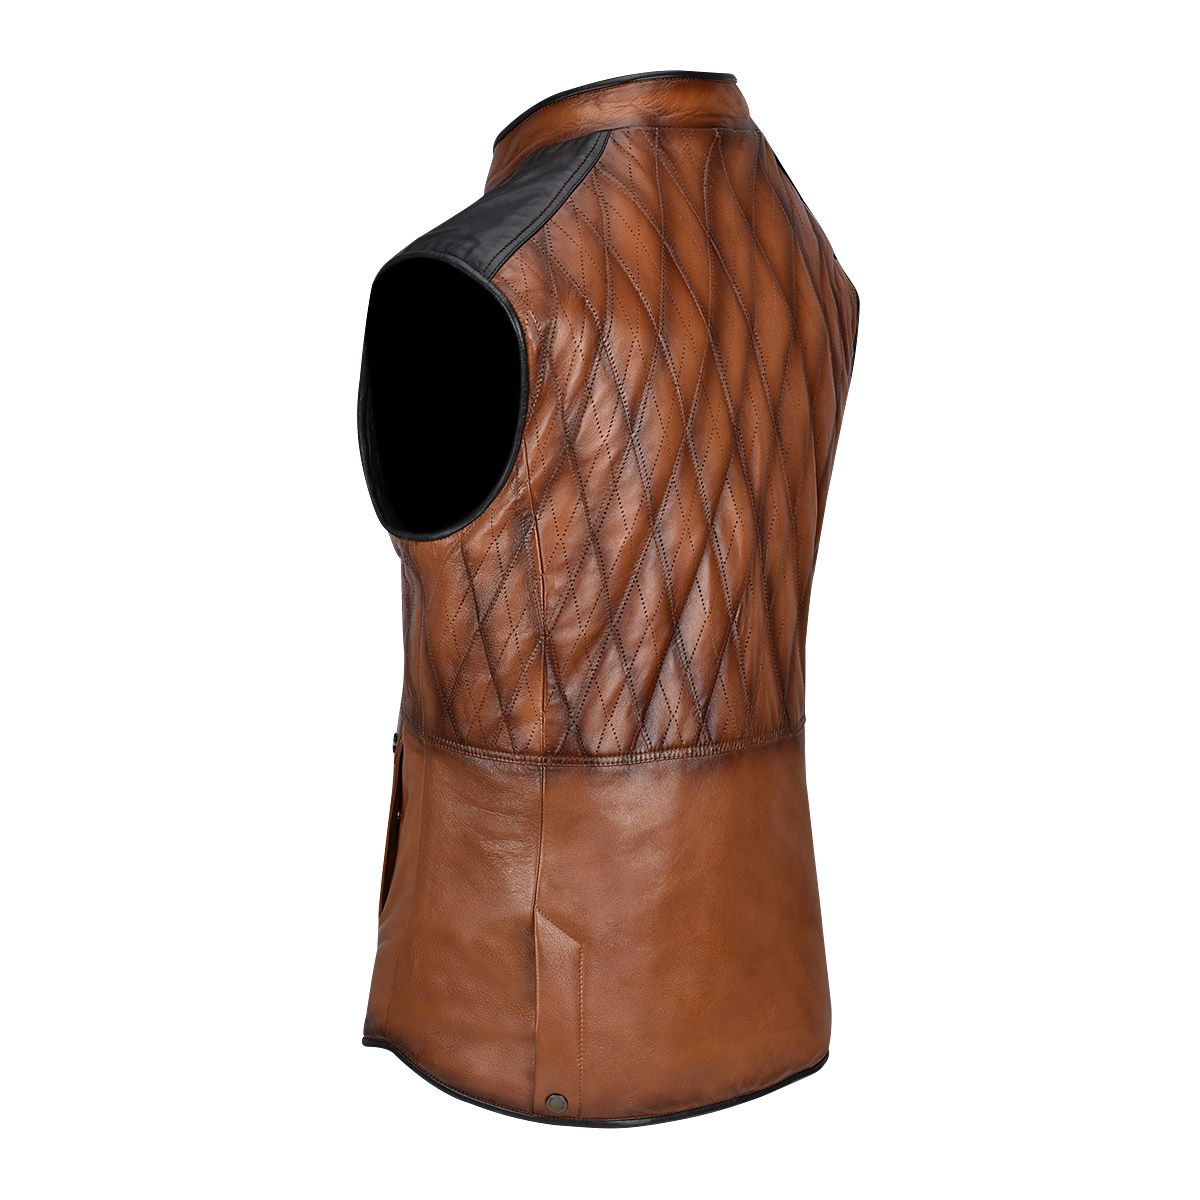 H302COB- Cuadra maple casual fashion quilted goat leather racer vest for men-Kuet.us - Cuadra Boots - Western Cowboy, Casual Fashion and Dress Boots